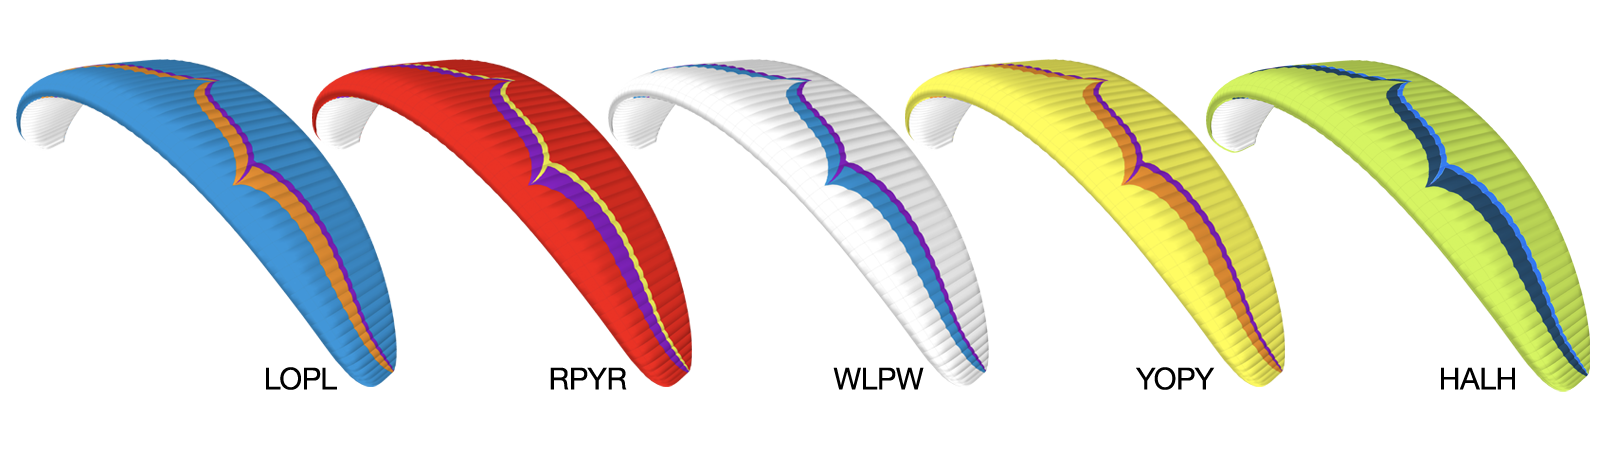 Ozone - Alpina 4 - Fly Above All Airsports - color chart